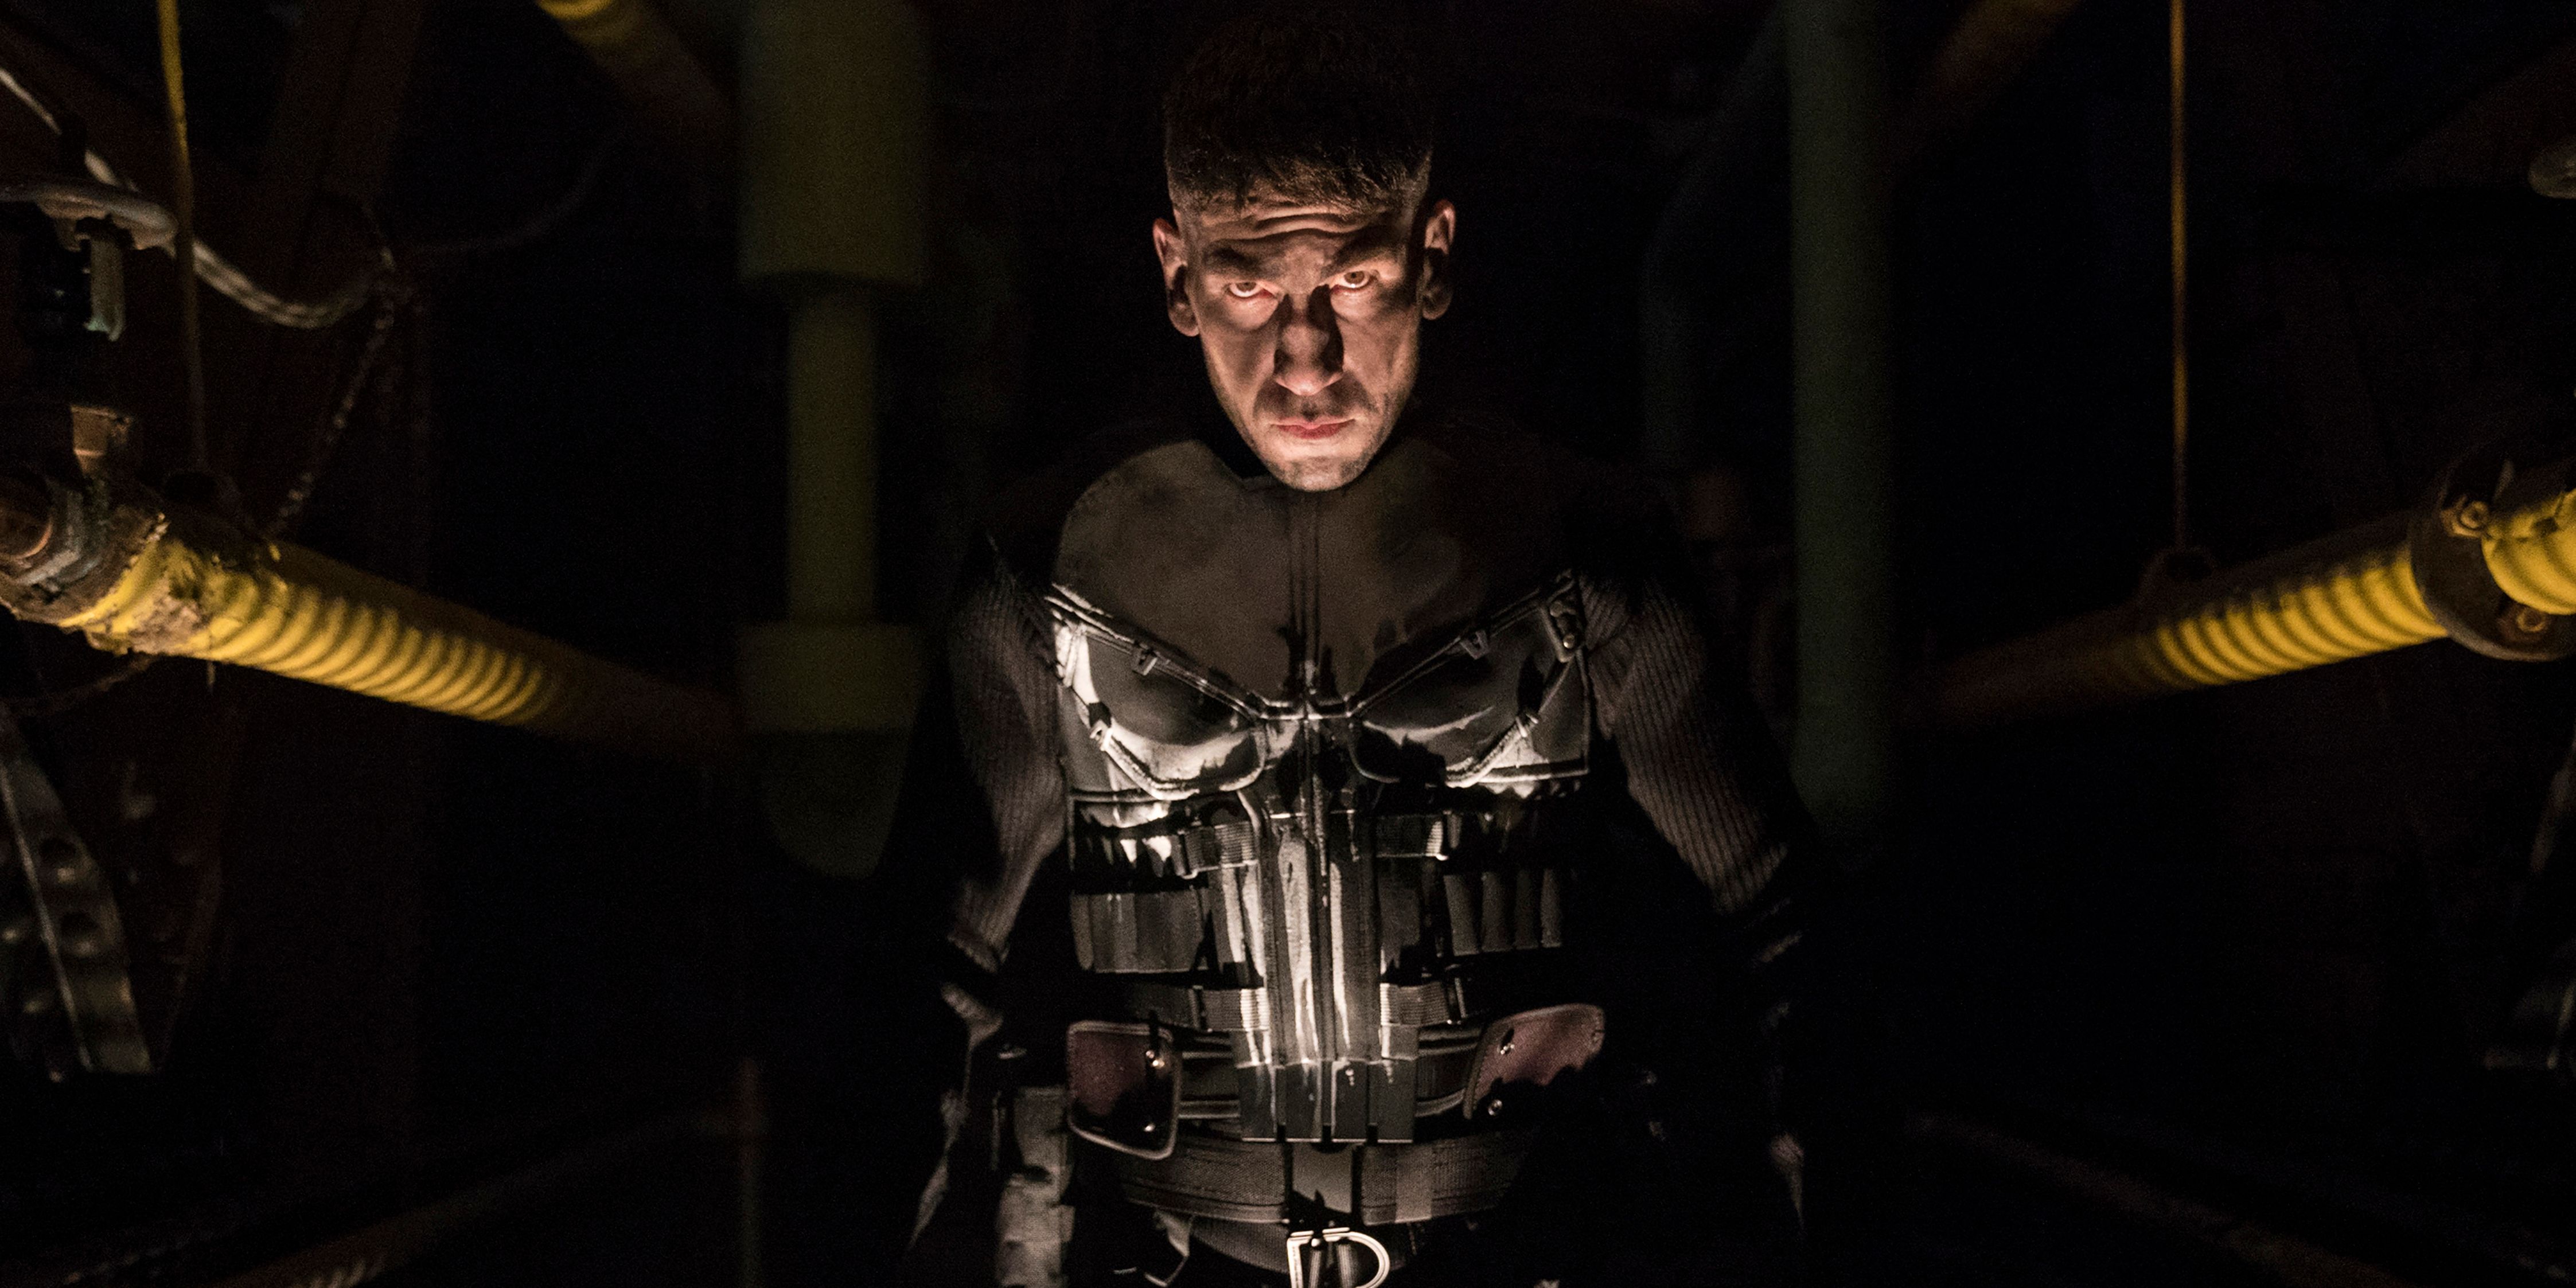 The Punisher prepares to attack in Netflix series.